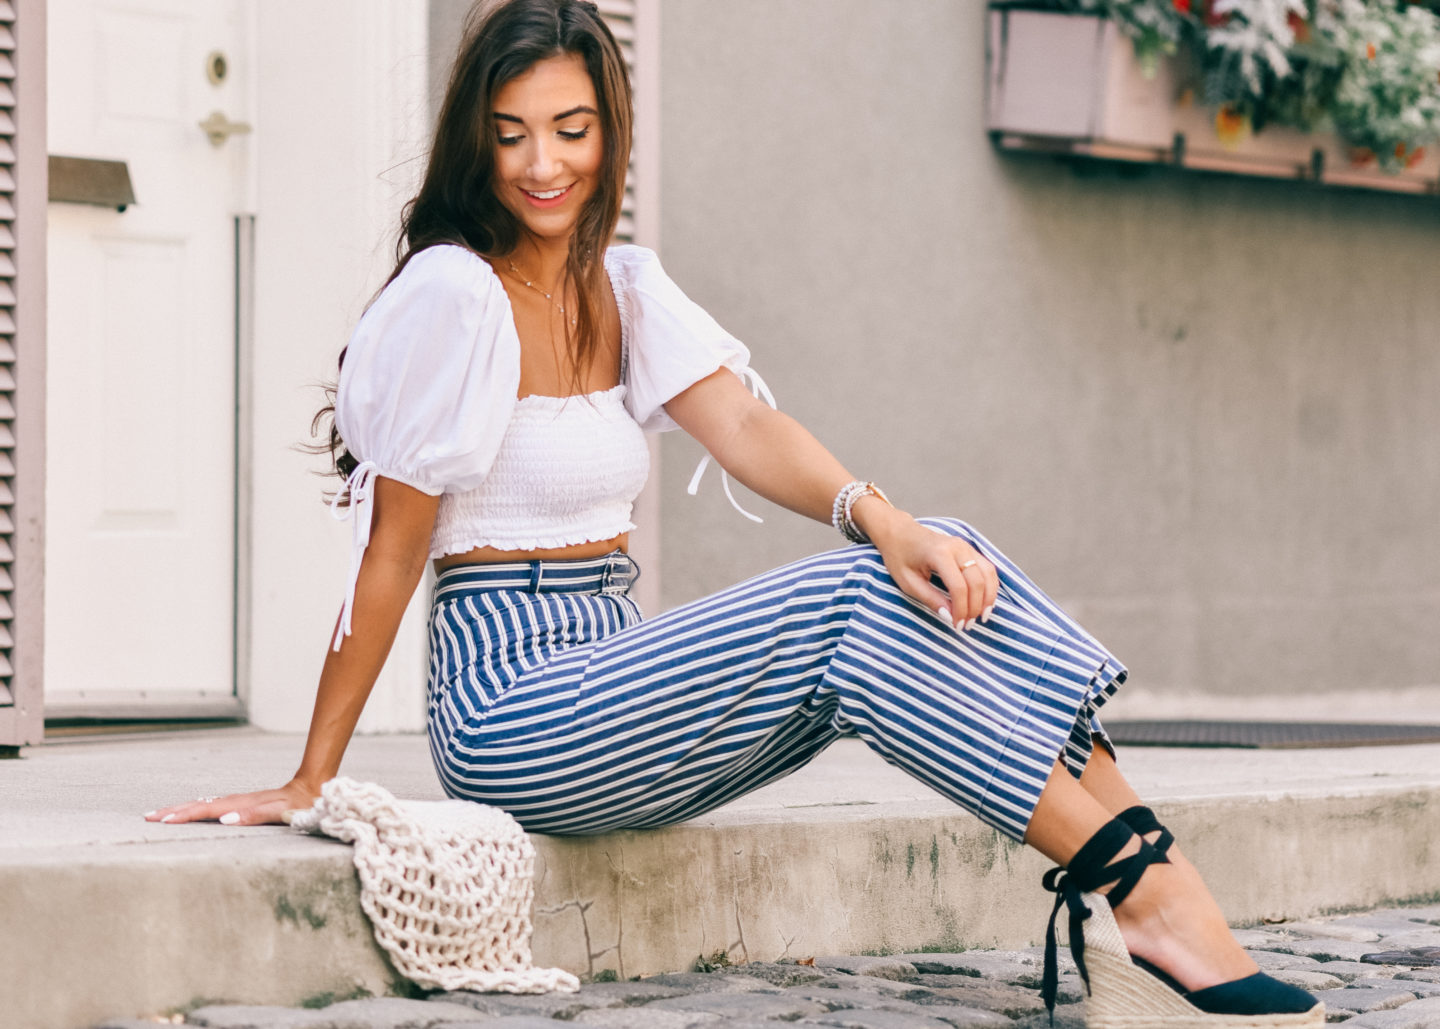 Striped Pants & Wedges for End of Summer